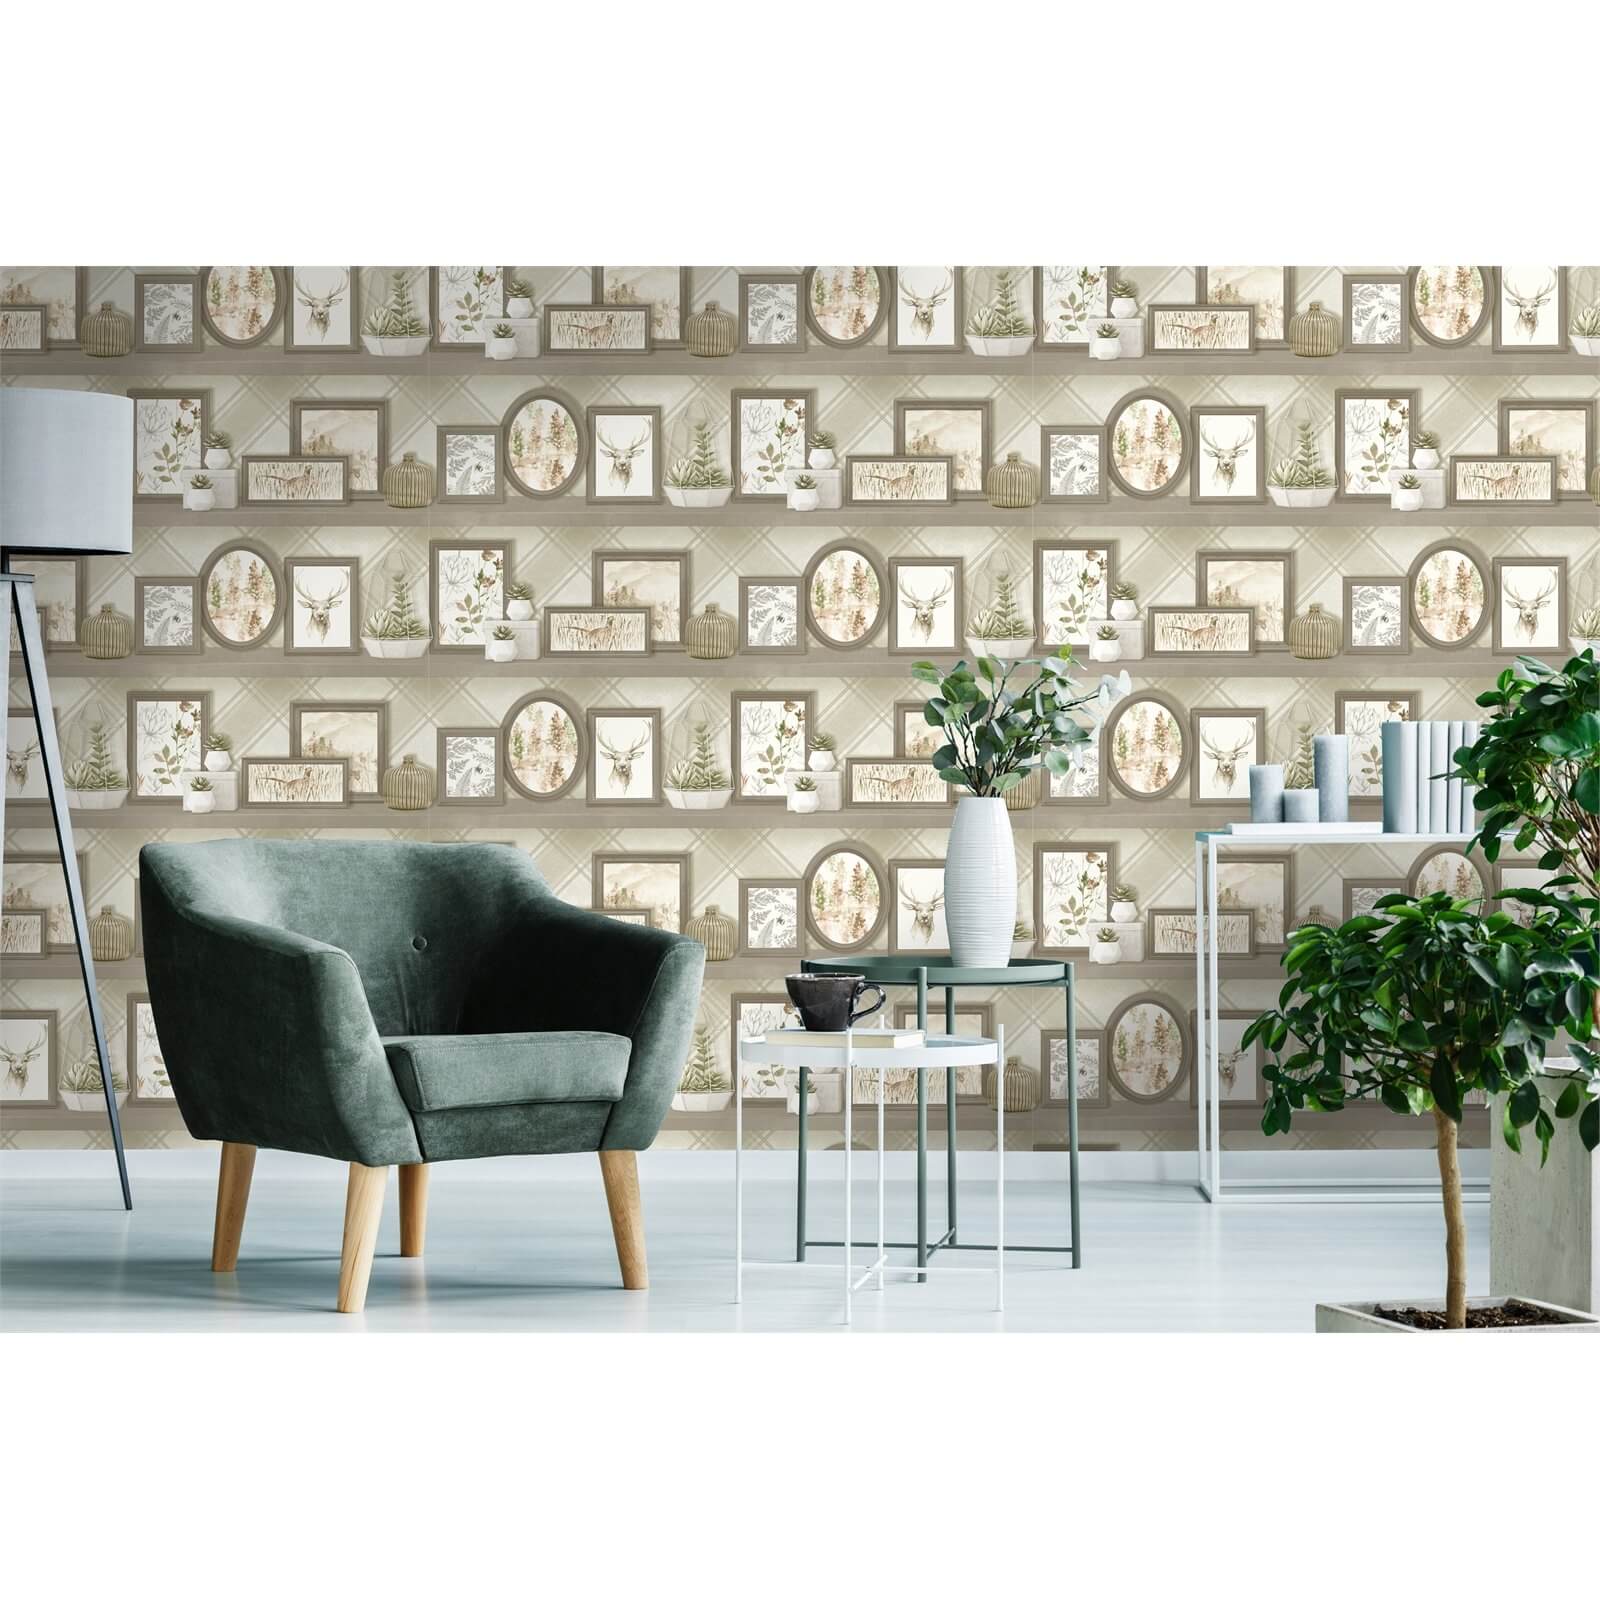 Holden Decor Stag Frames Animal Smooth Beige and Grey Wallpaper